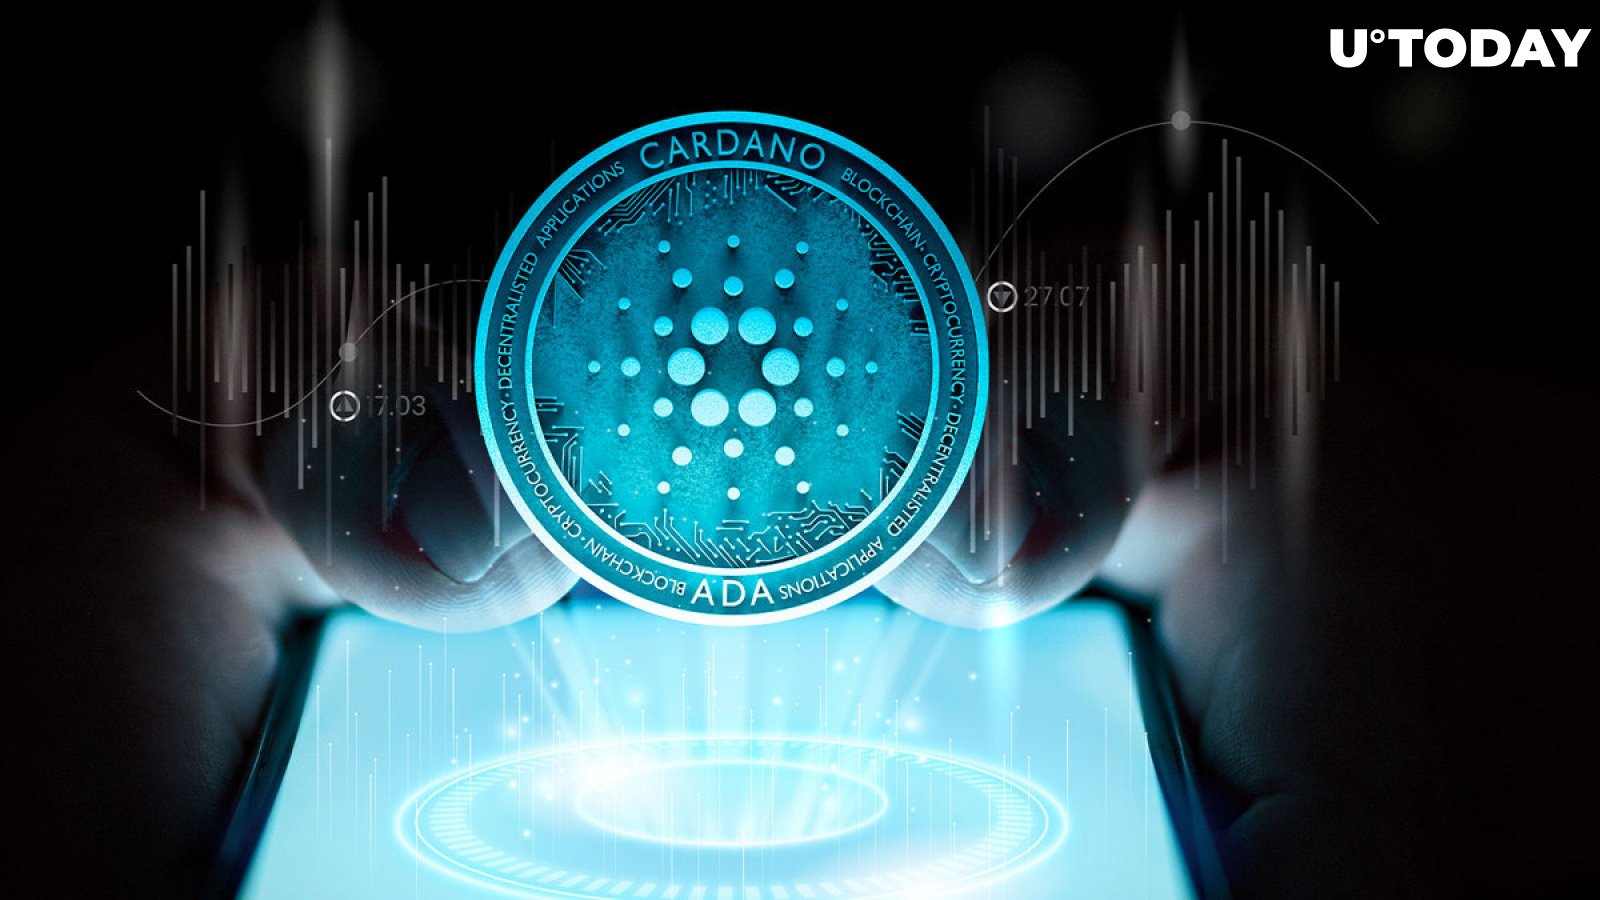 Cardano Achieves Historic Milestone With Fiat-Backed Stablecoin